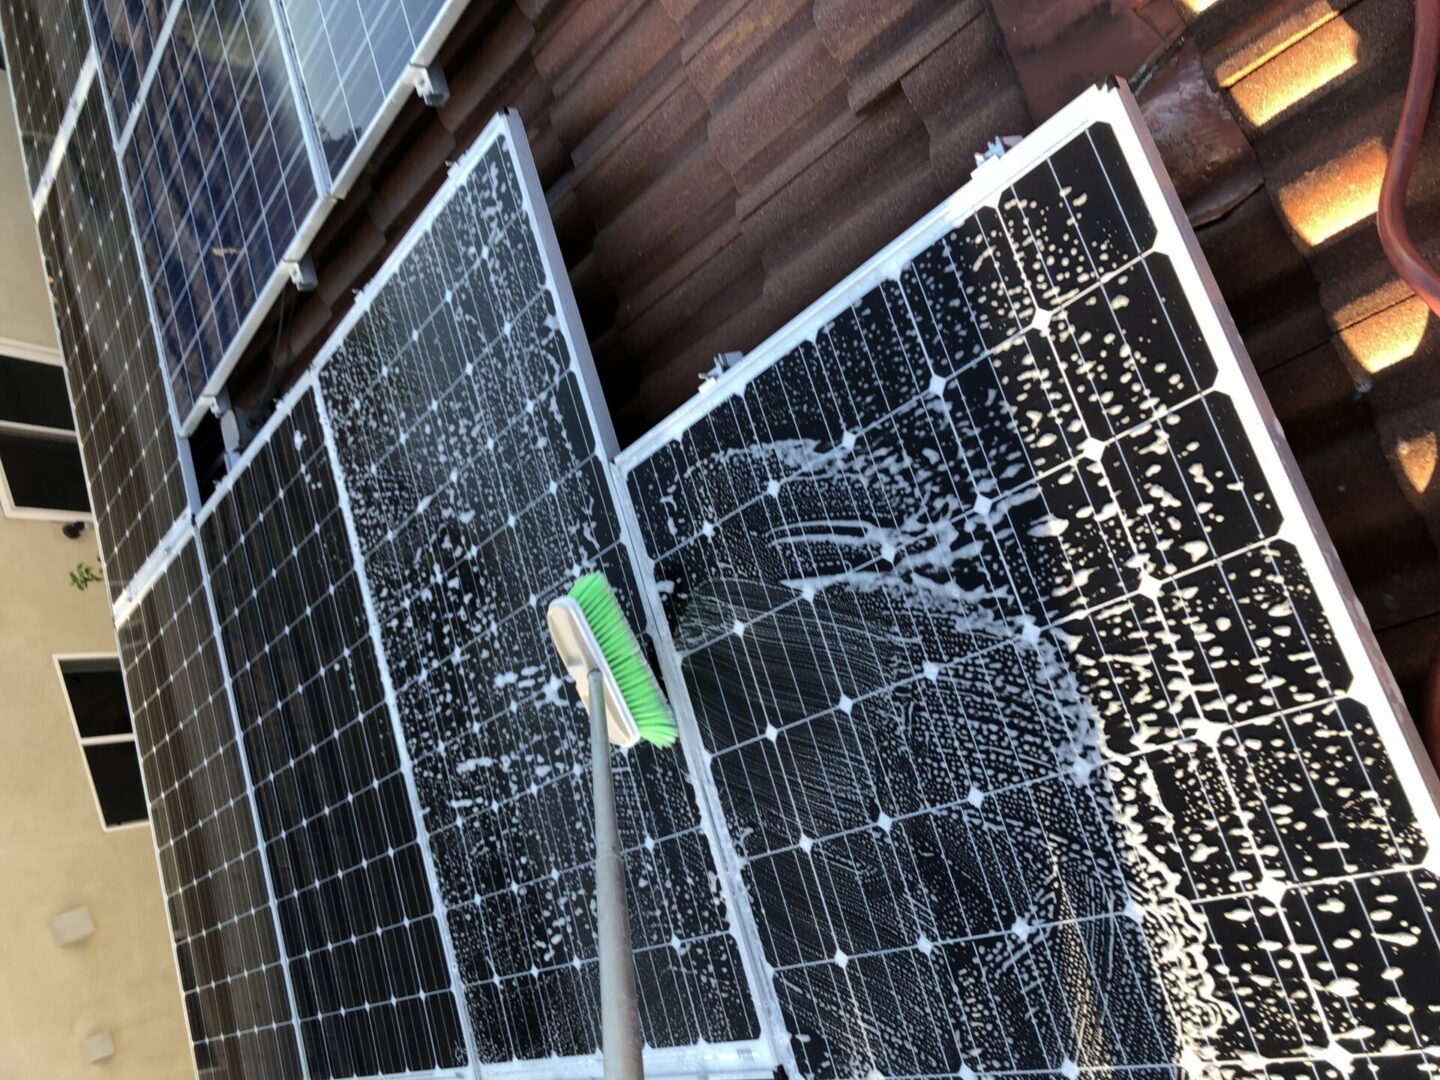 Using a mop to clean solar panels